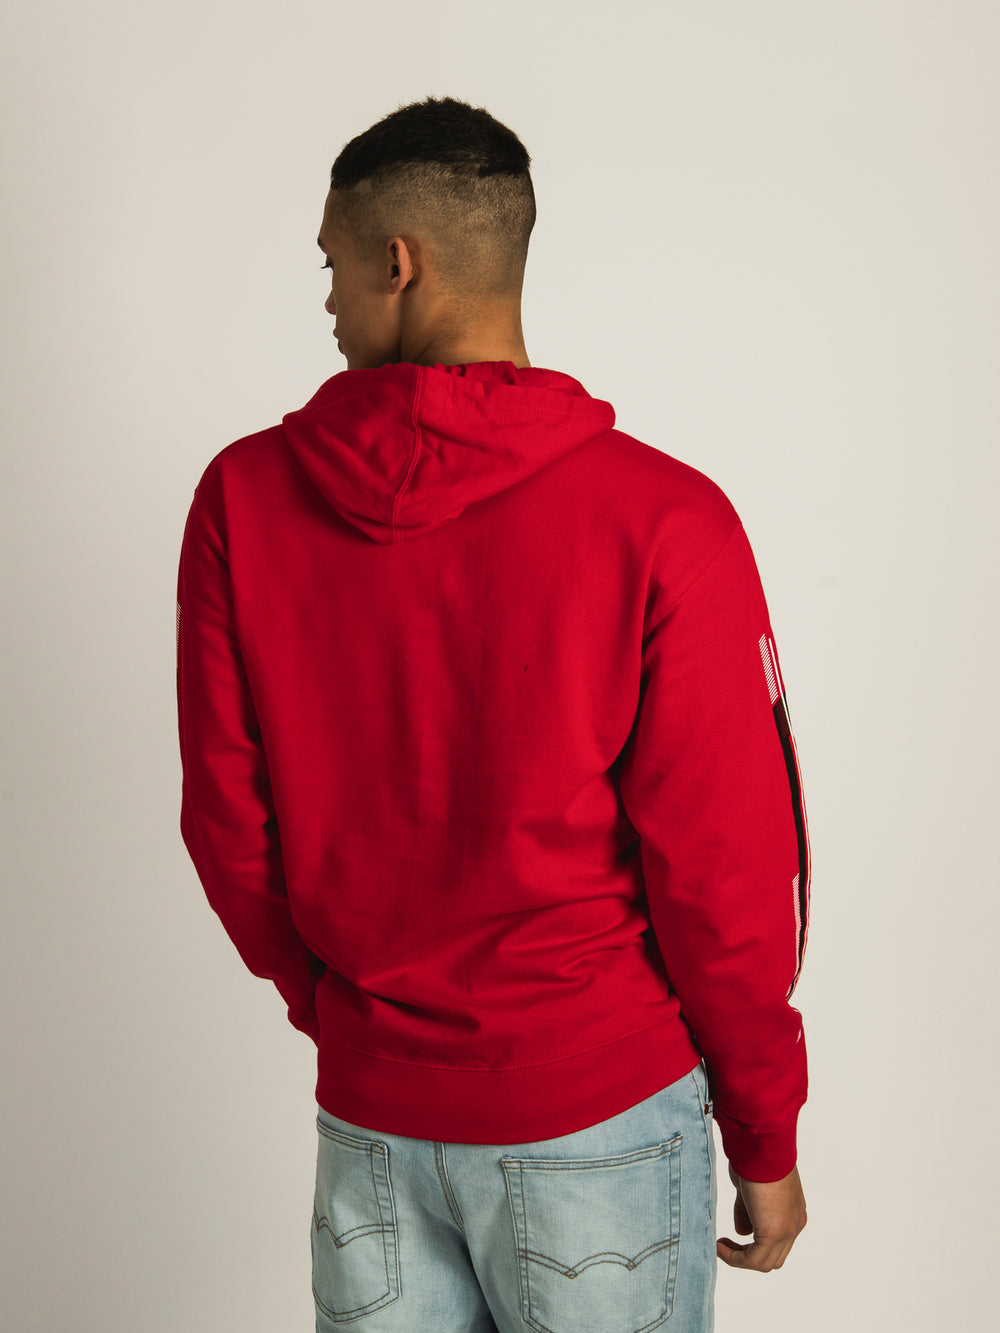 HOONIGAN 3RD GENERATION PULL OVER HOODIE - CLEARANCE